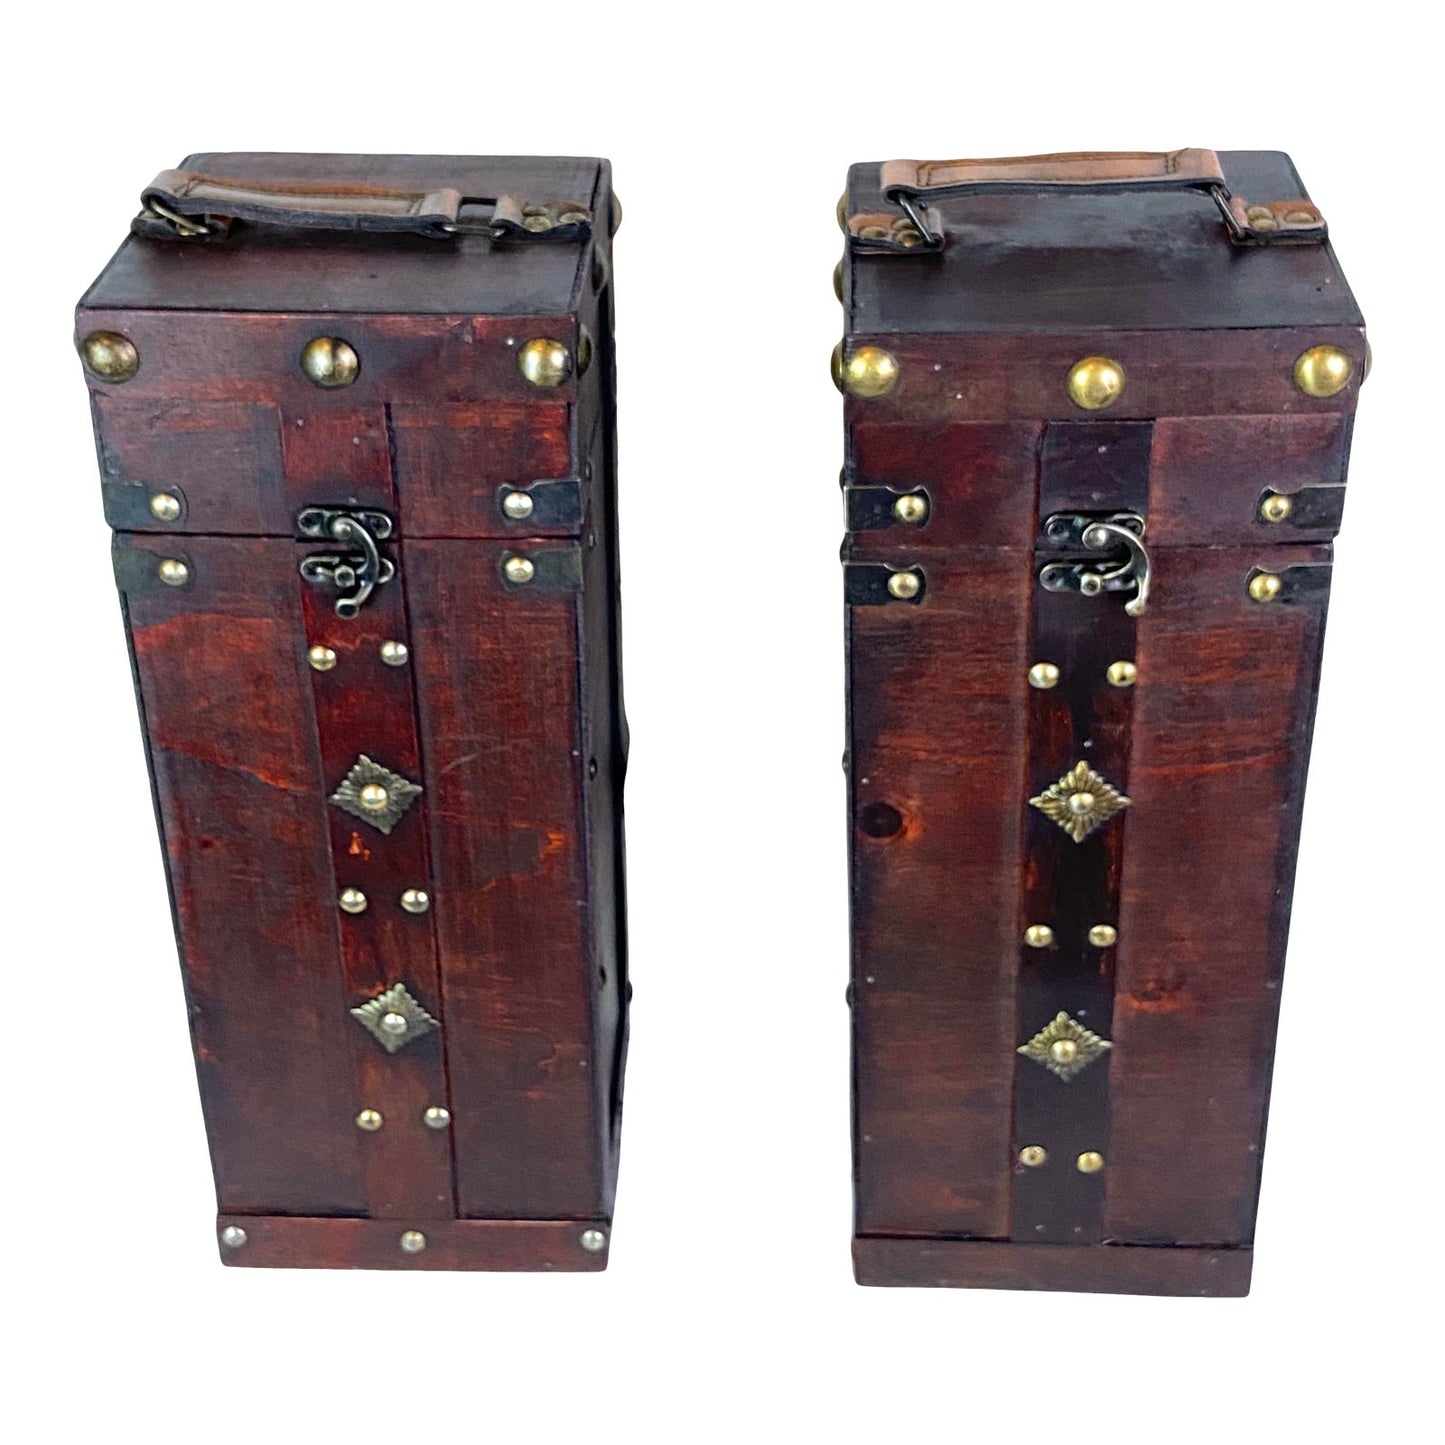 [SOLD] Brass Wood Wine Boxes - Pair of 2